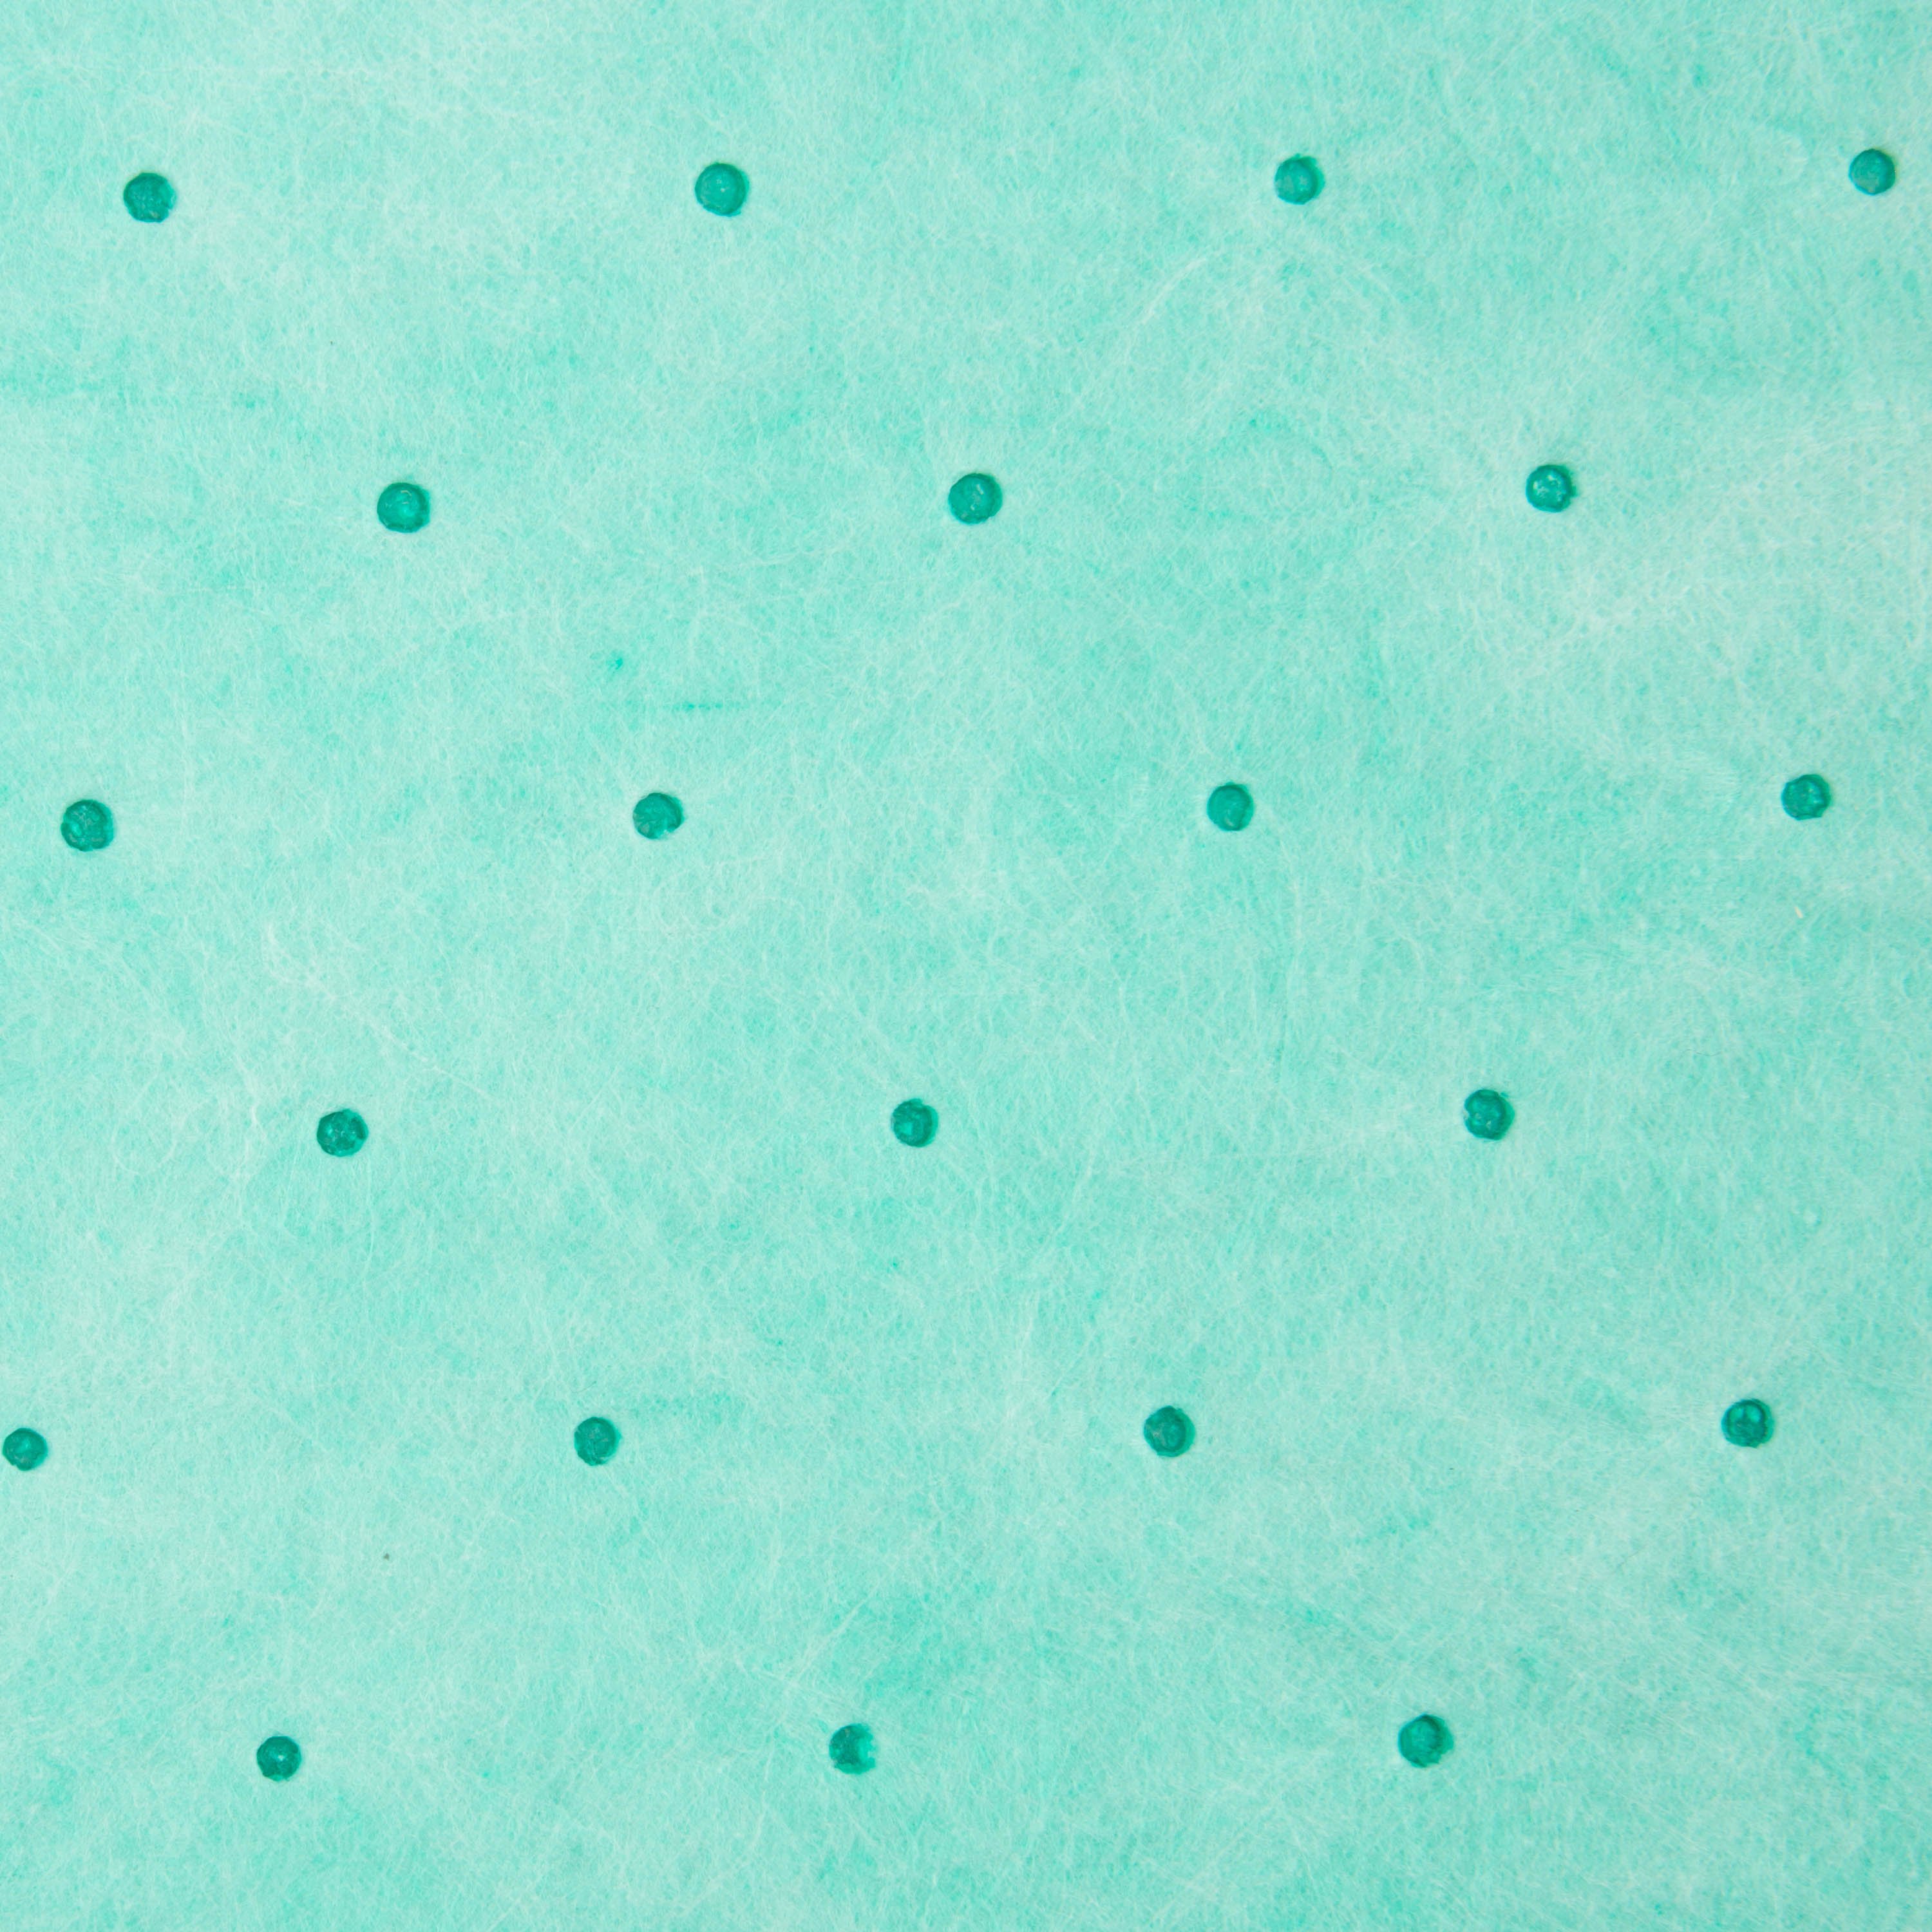 Green Absorbent Floor Mat for Surgery - Non-Sterile